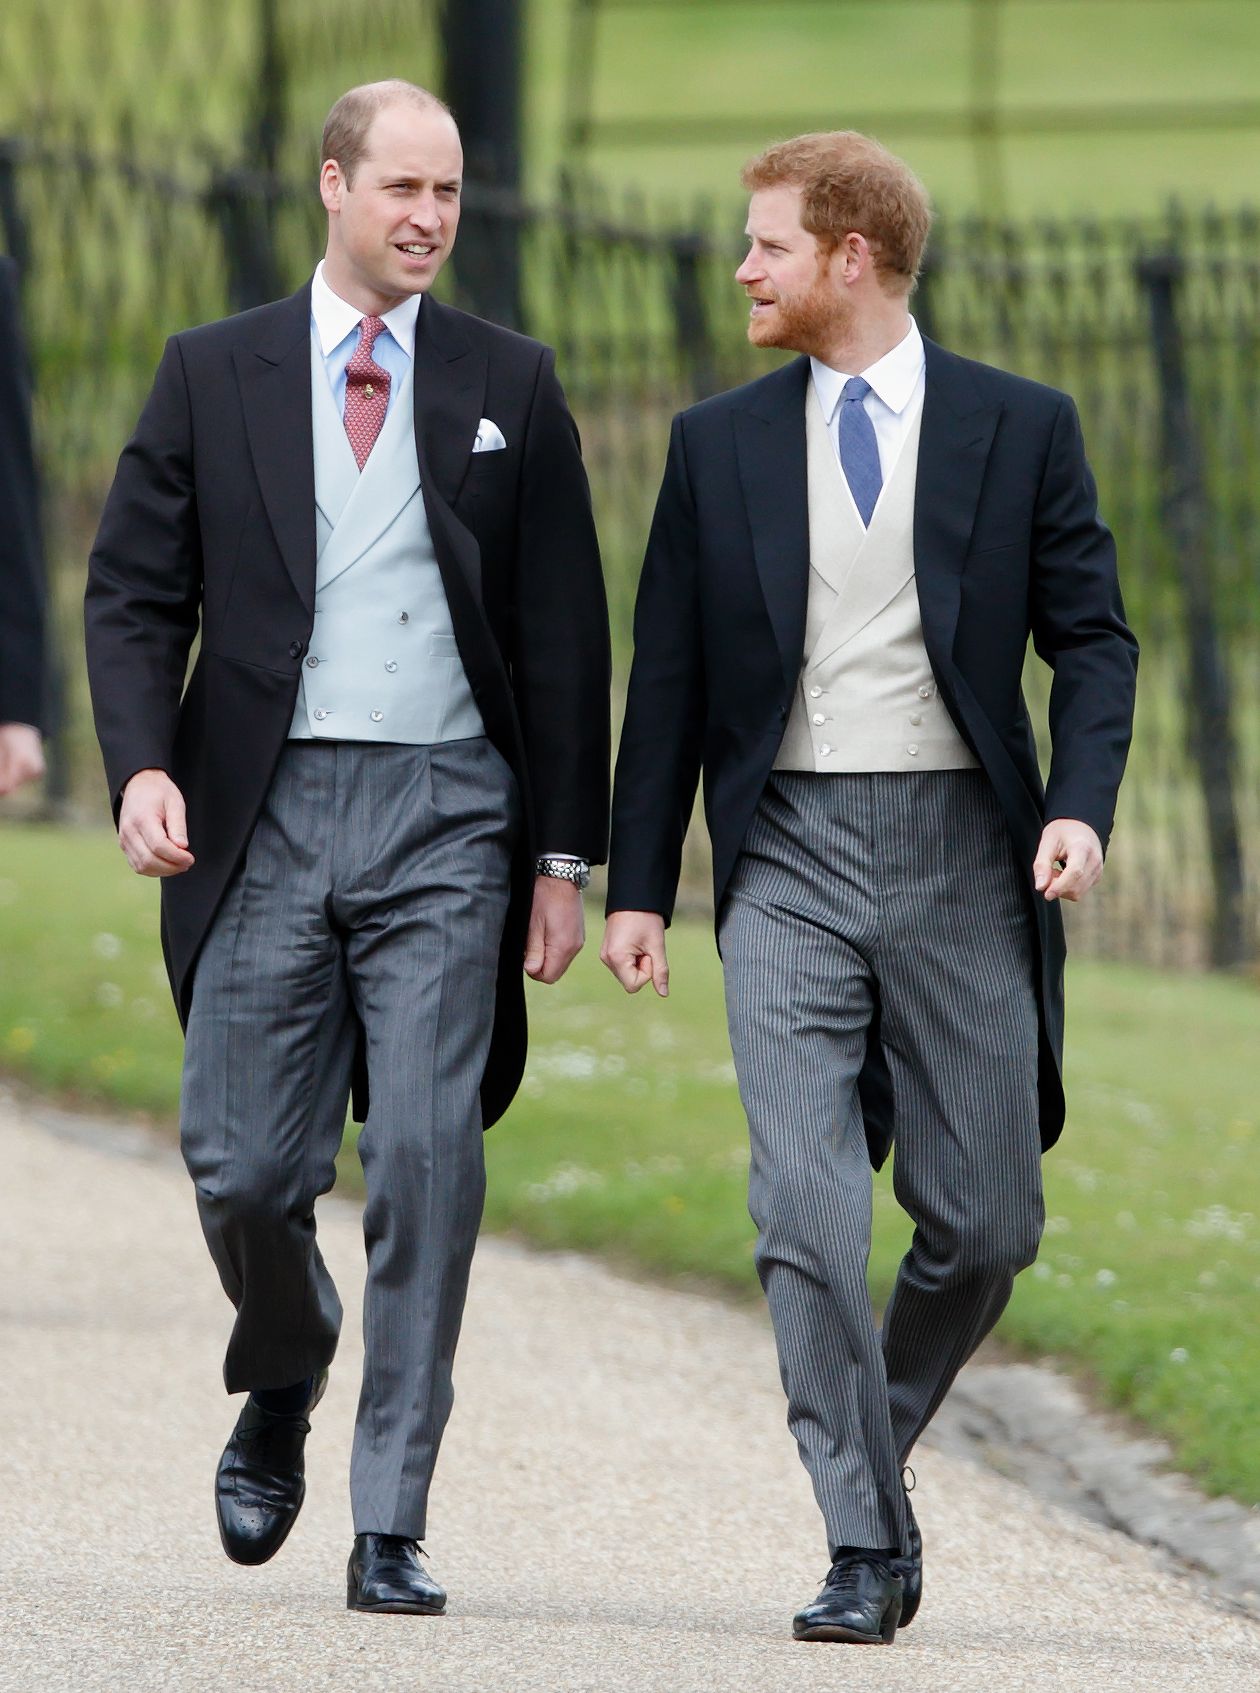 Prince William and Prince Harry at Pippa Middleton and James Matthews' wedding on May 20, 2017, in Englefield Green, England. | Source: Max Mumby/Indigo/Getty Images